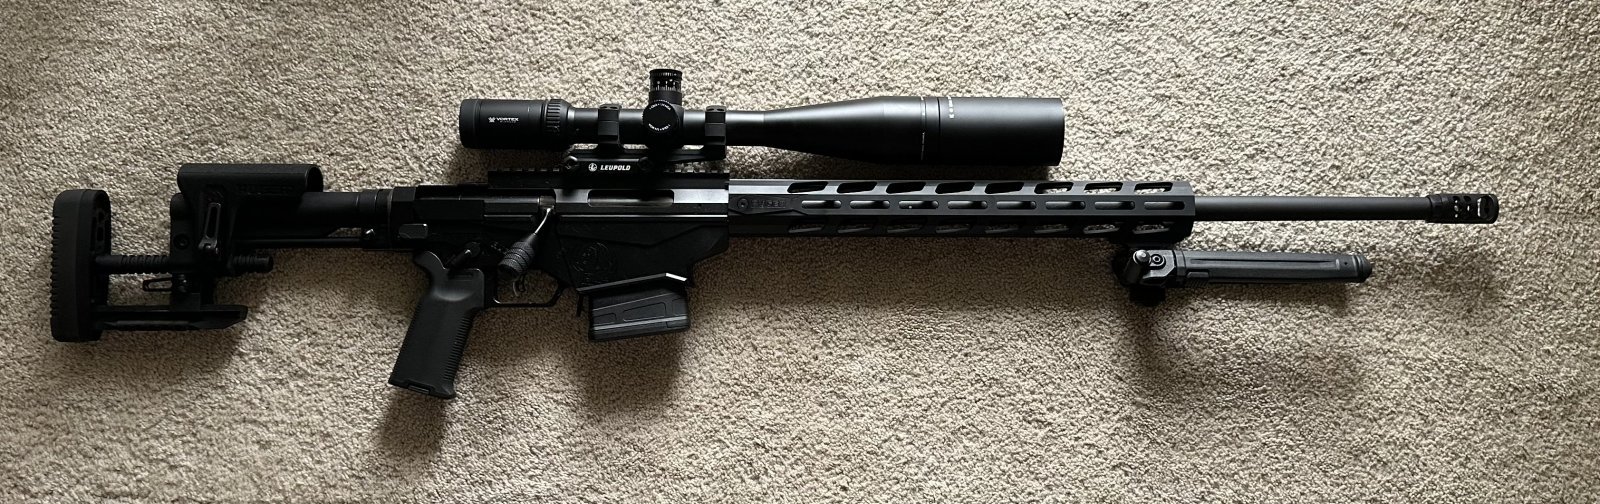 Ruger Precision Rifle 6.5 Creedmoor Never Fired